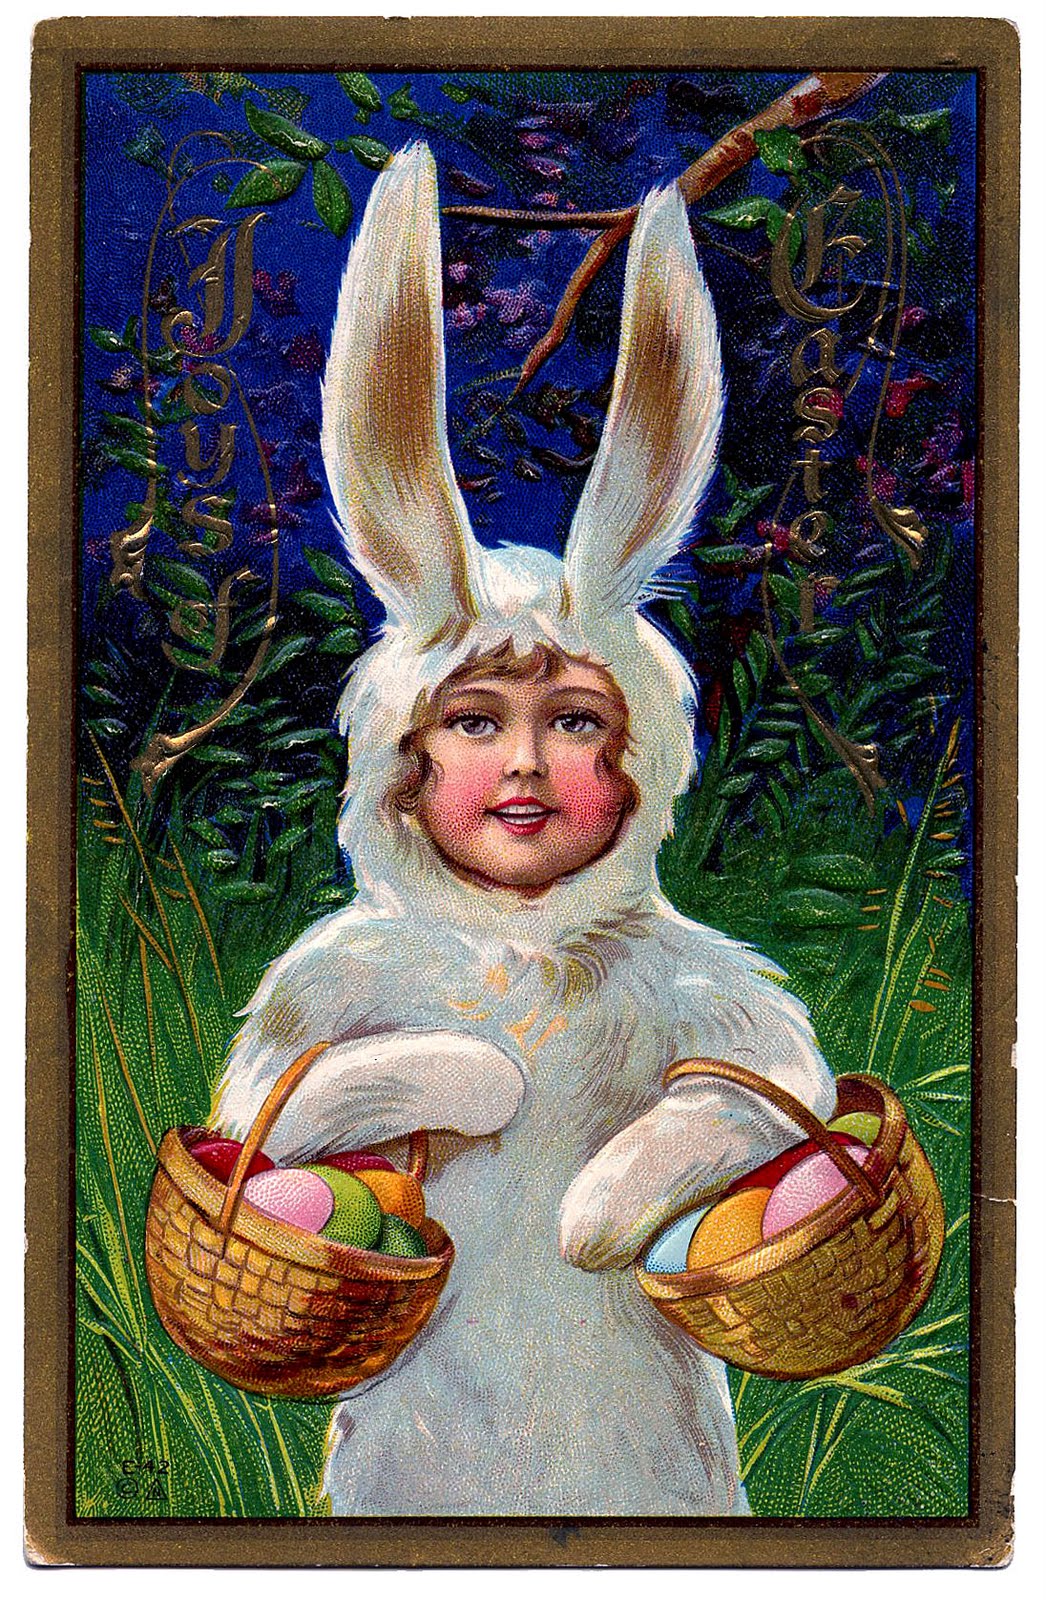 Vintage Easter Clip Art - Sweet Girl in Bunny Suit - The Graphics Fairy